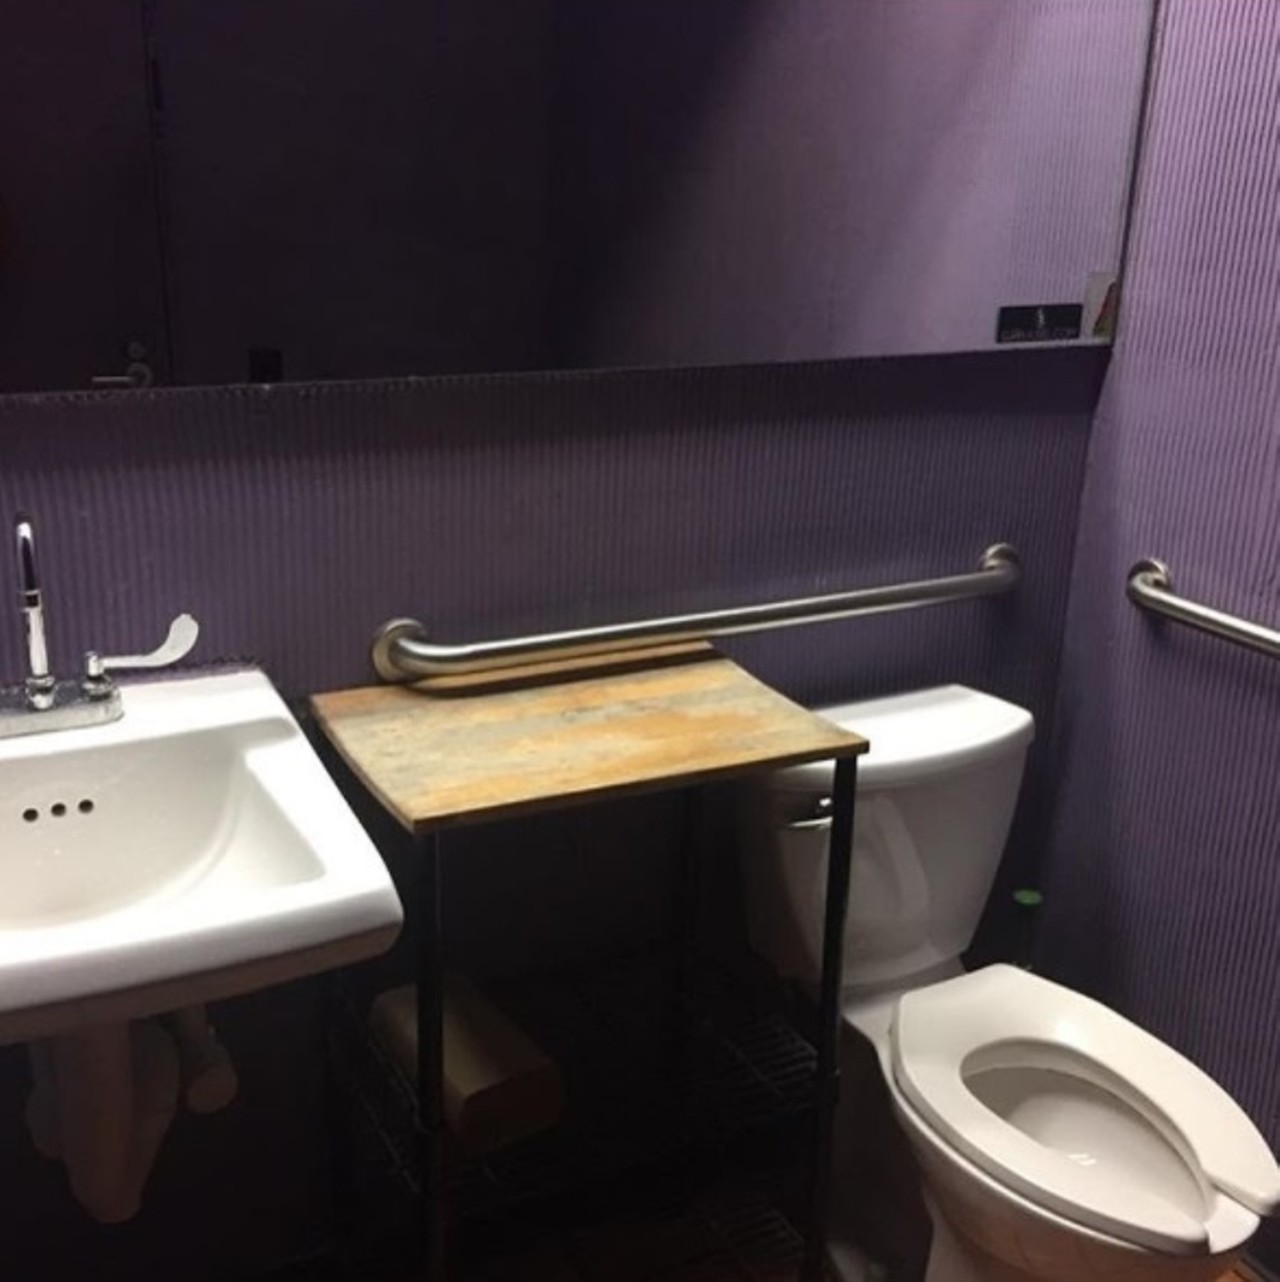 XYZ Tavern
6419 Detroit Ave., 216-706-1104
If you&#146;re in Detroit Shoreway and it&#146;s too far from home, head to XYZ for clean single-stall bathroom. Come on, it's purple, and it will offer you the solace you need. 
Photo via Bathrooms Of Cleveland/Instagram